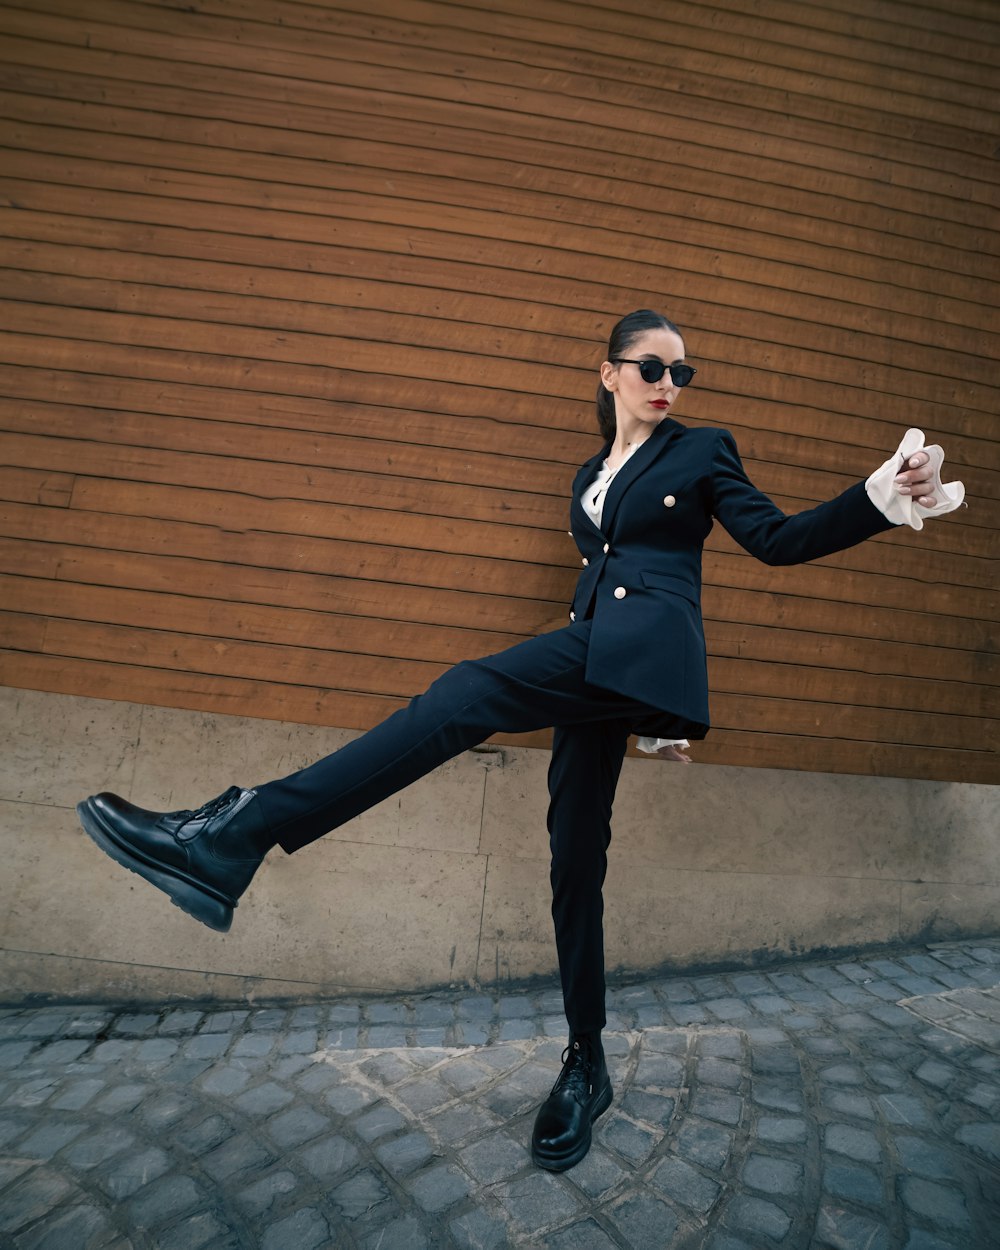 a woman in a suit and sunglasses posing for a picture